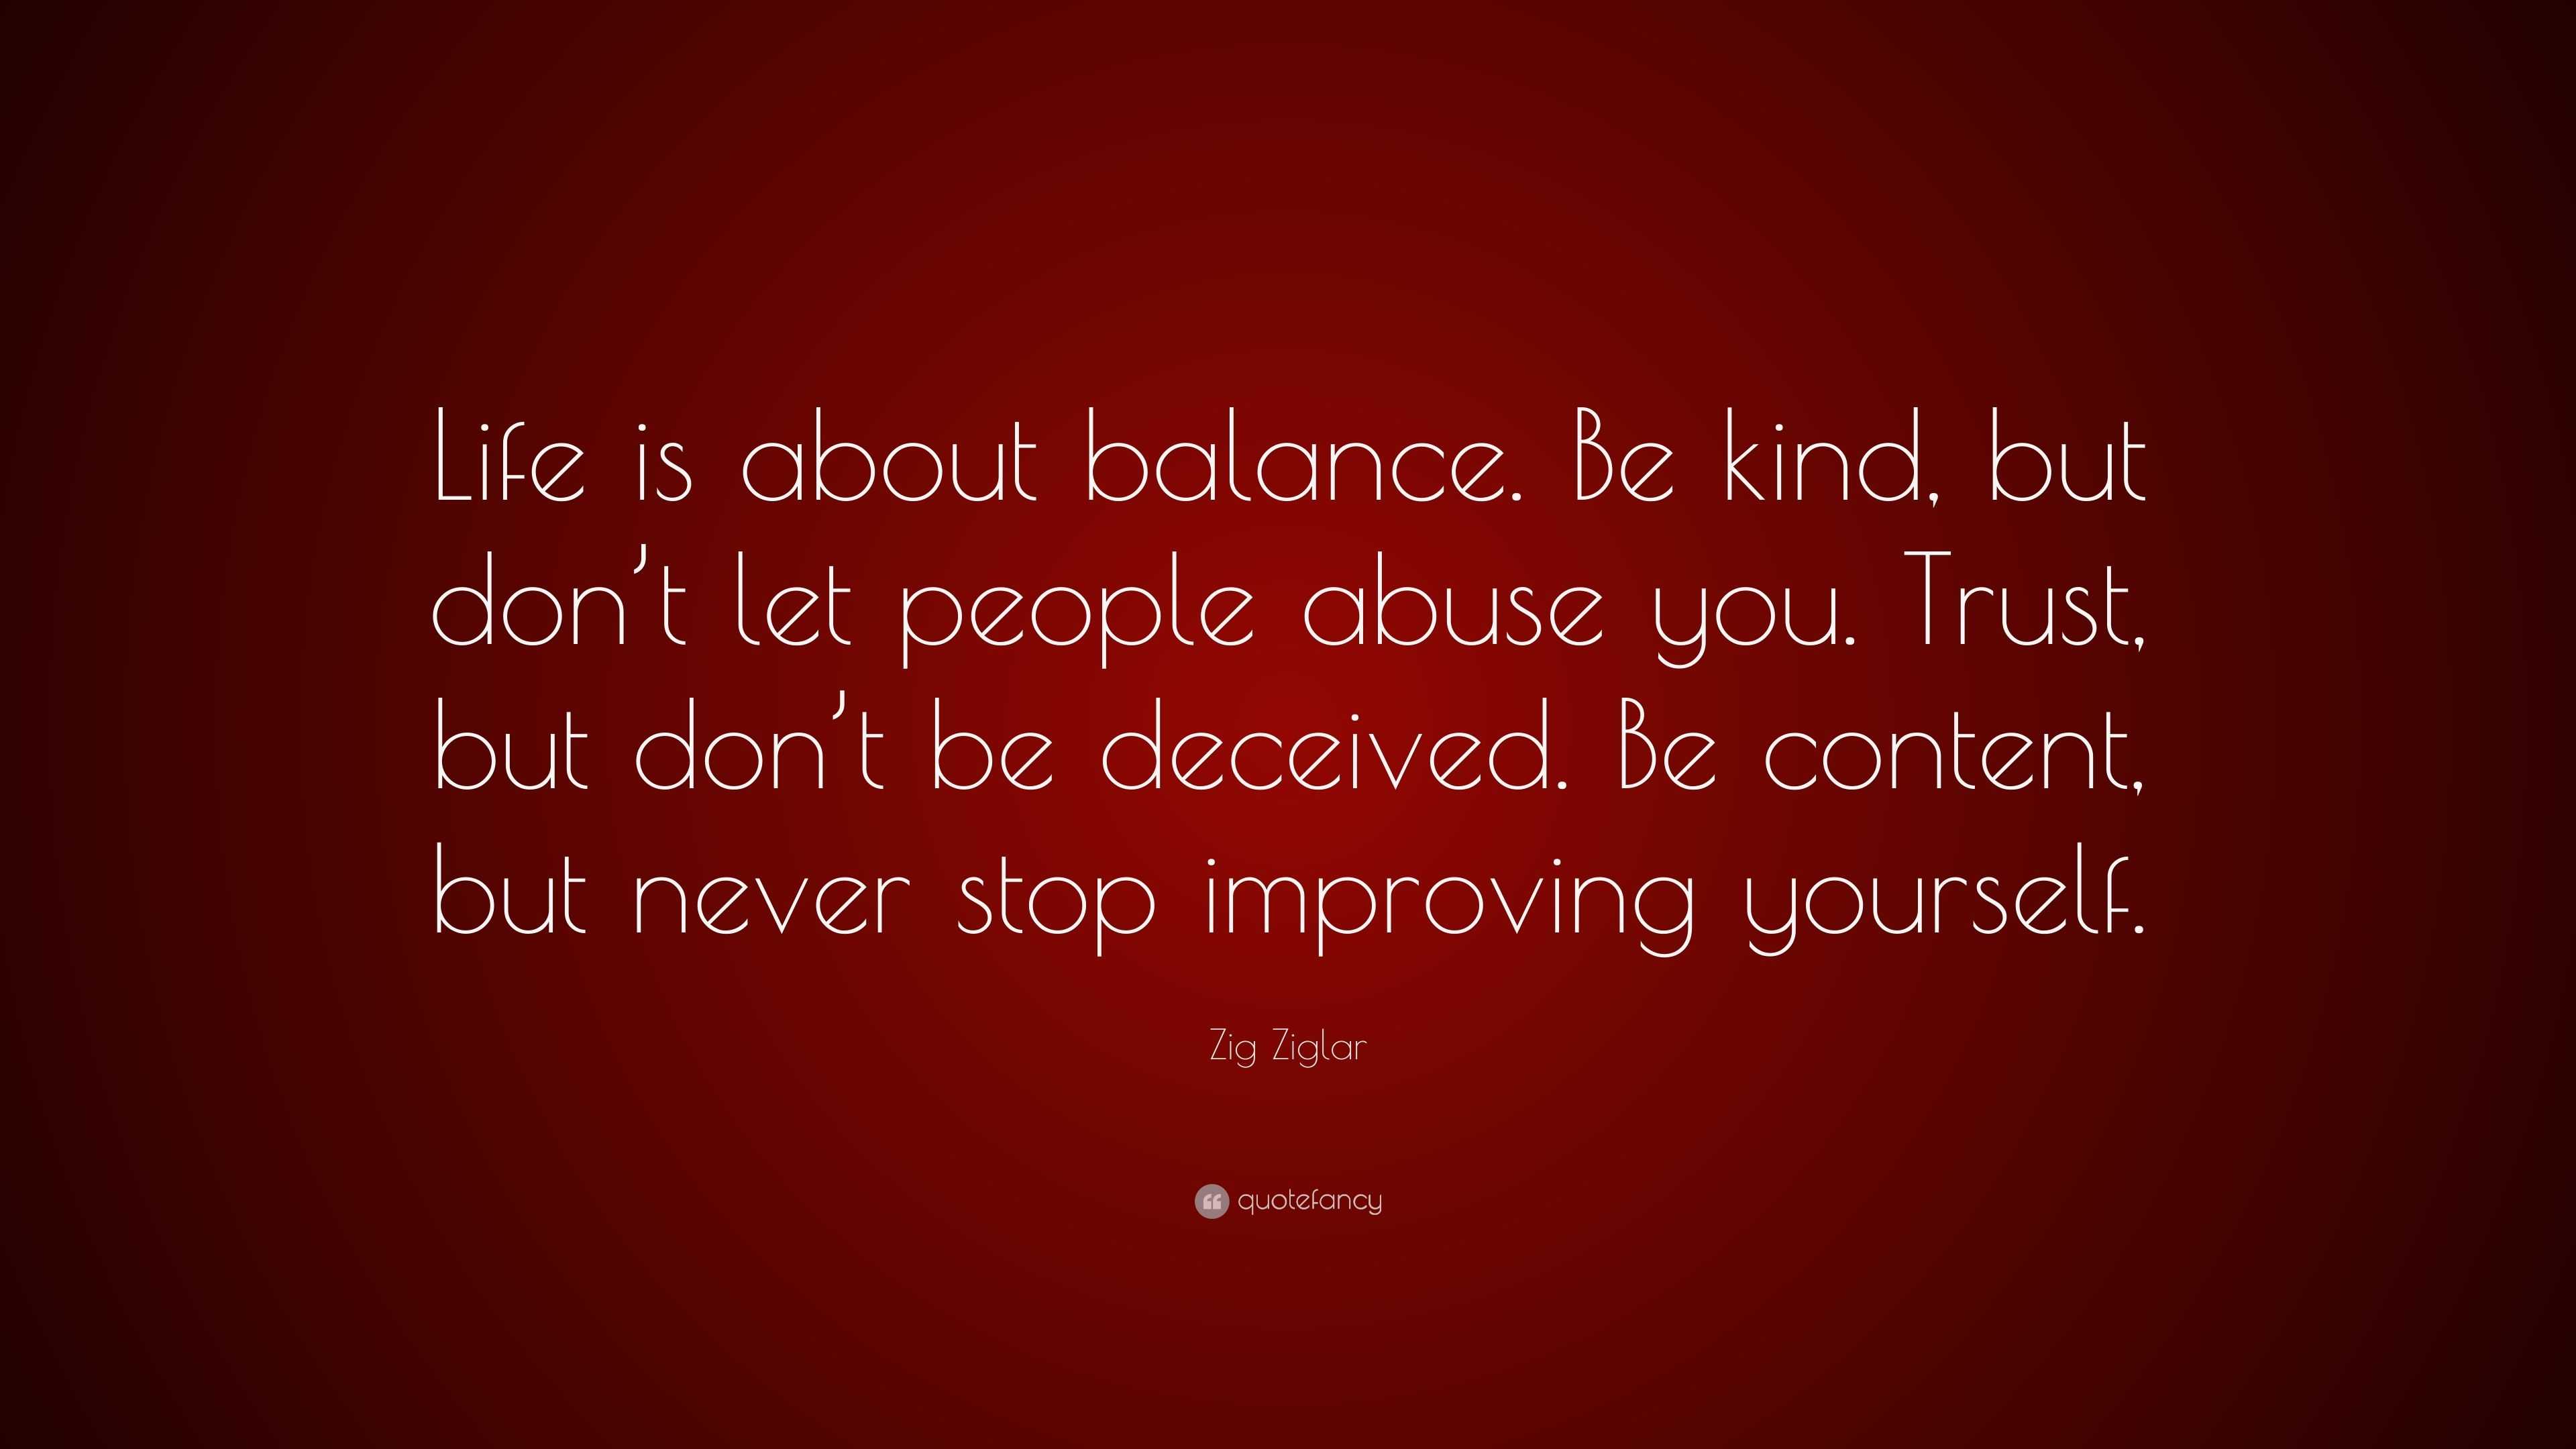 Zig Ziglar Quote: “Life is about balance. Be kind, but don’t let people